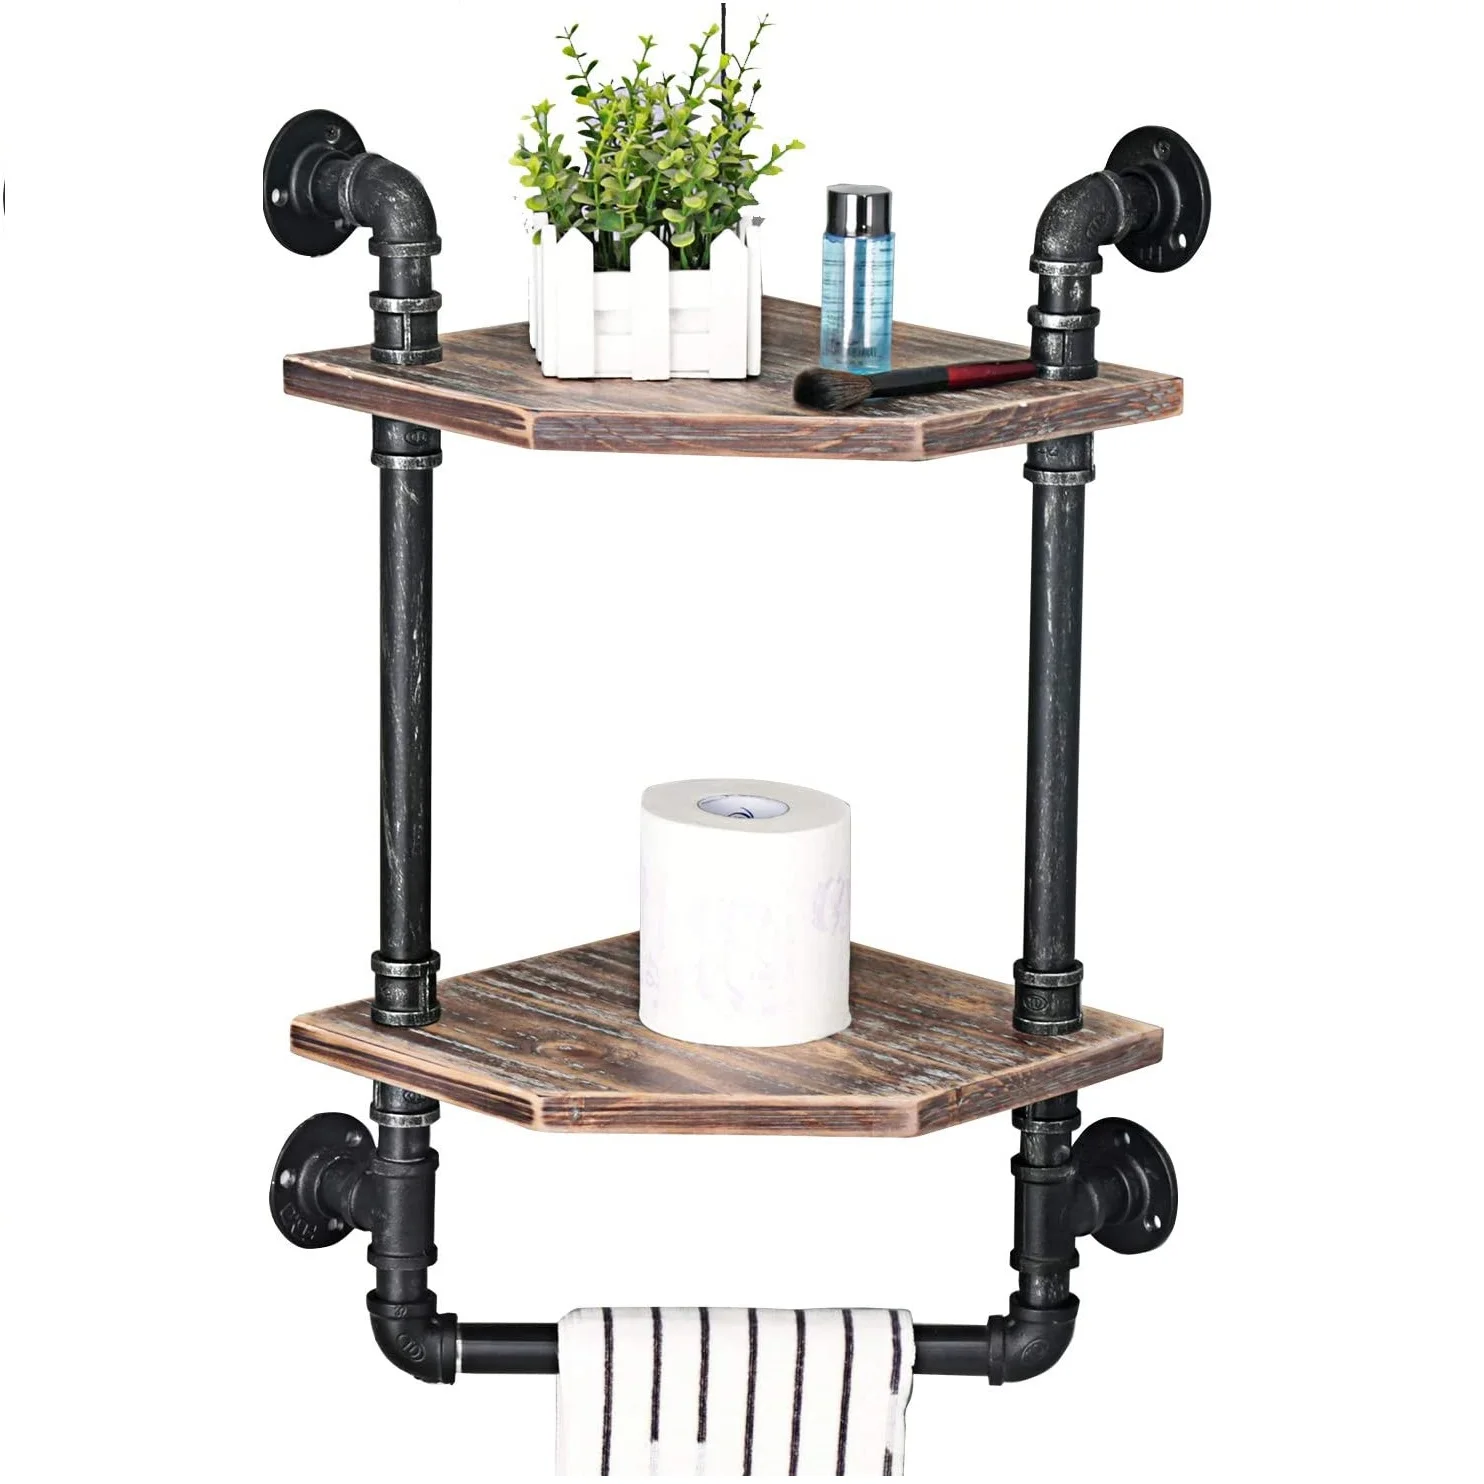 2 Tiered Industrial Pipe Bathroom Shelves Wall Mounted with 2